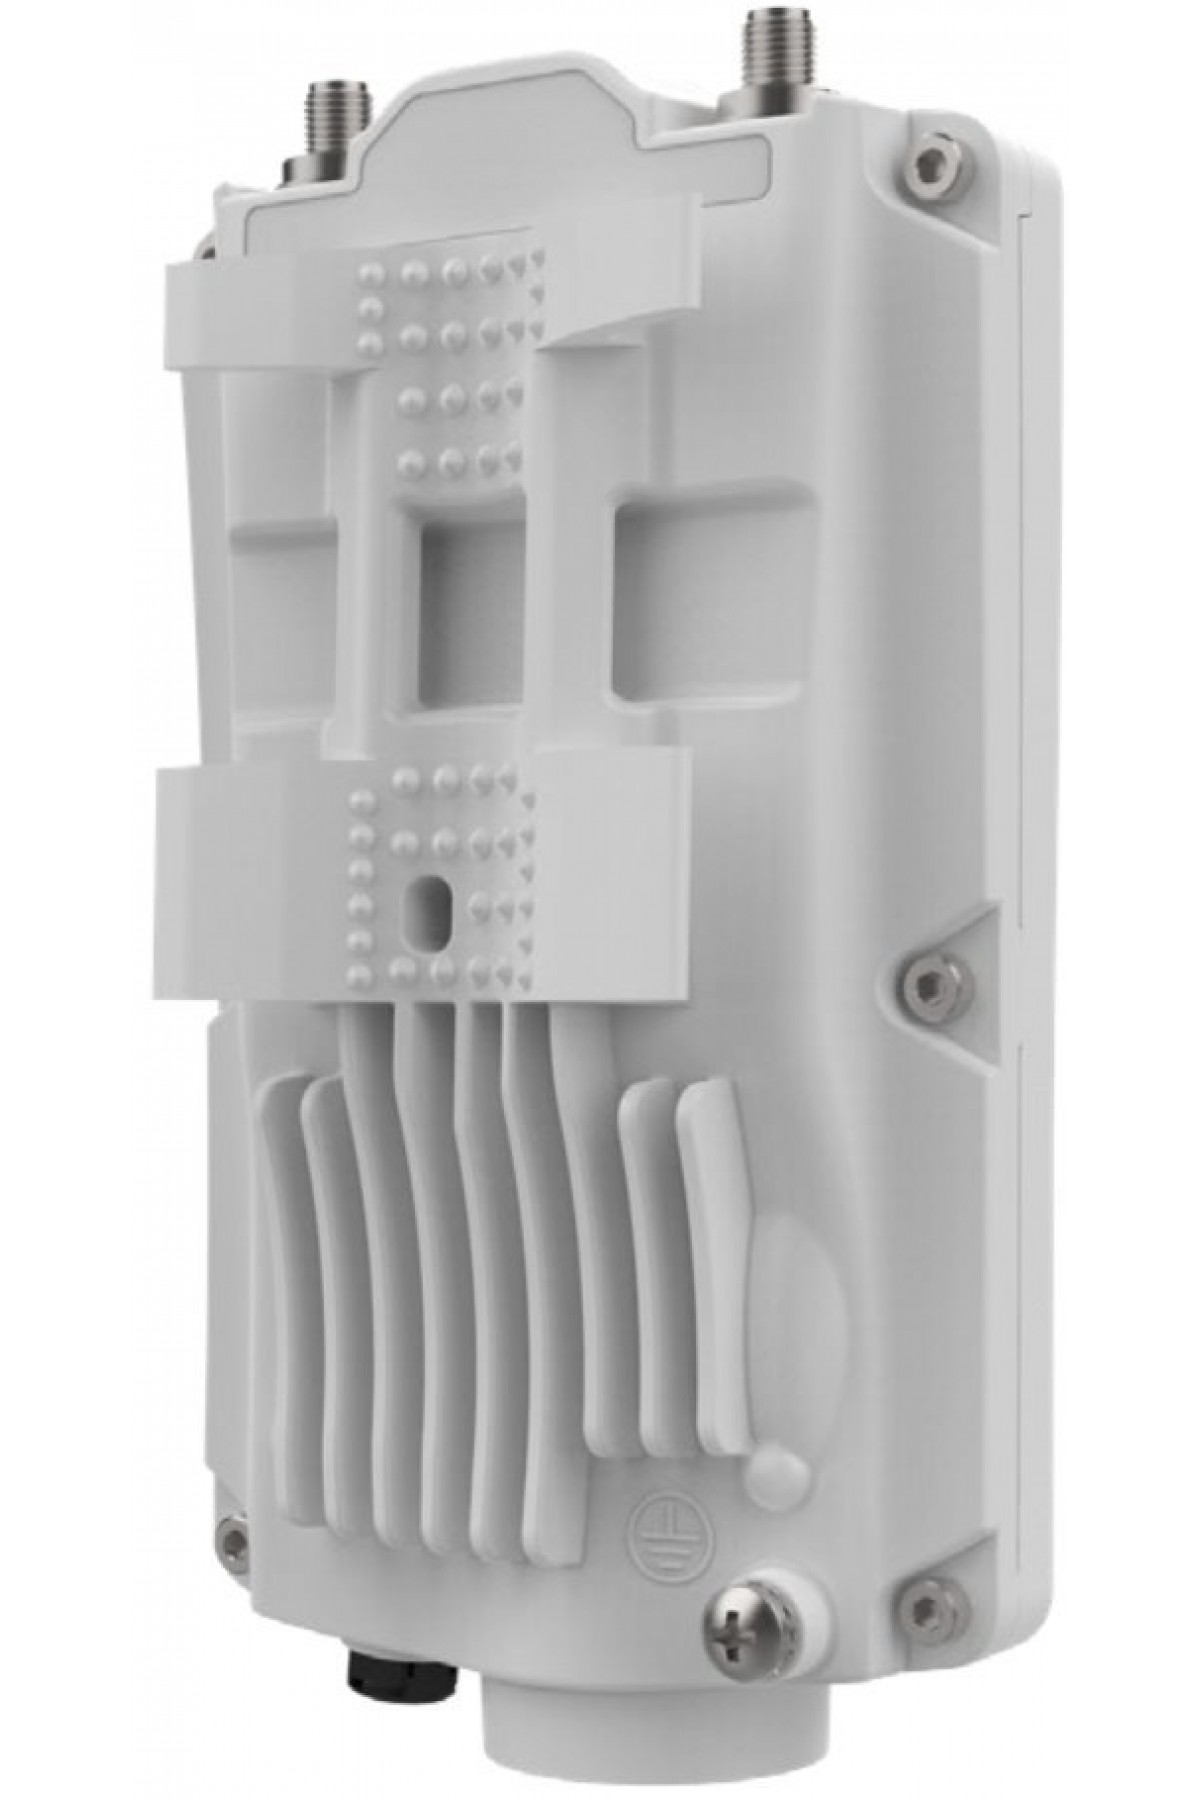 Mimosa A5x Connectorized PTMP Access Point